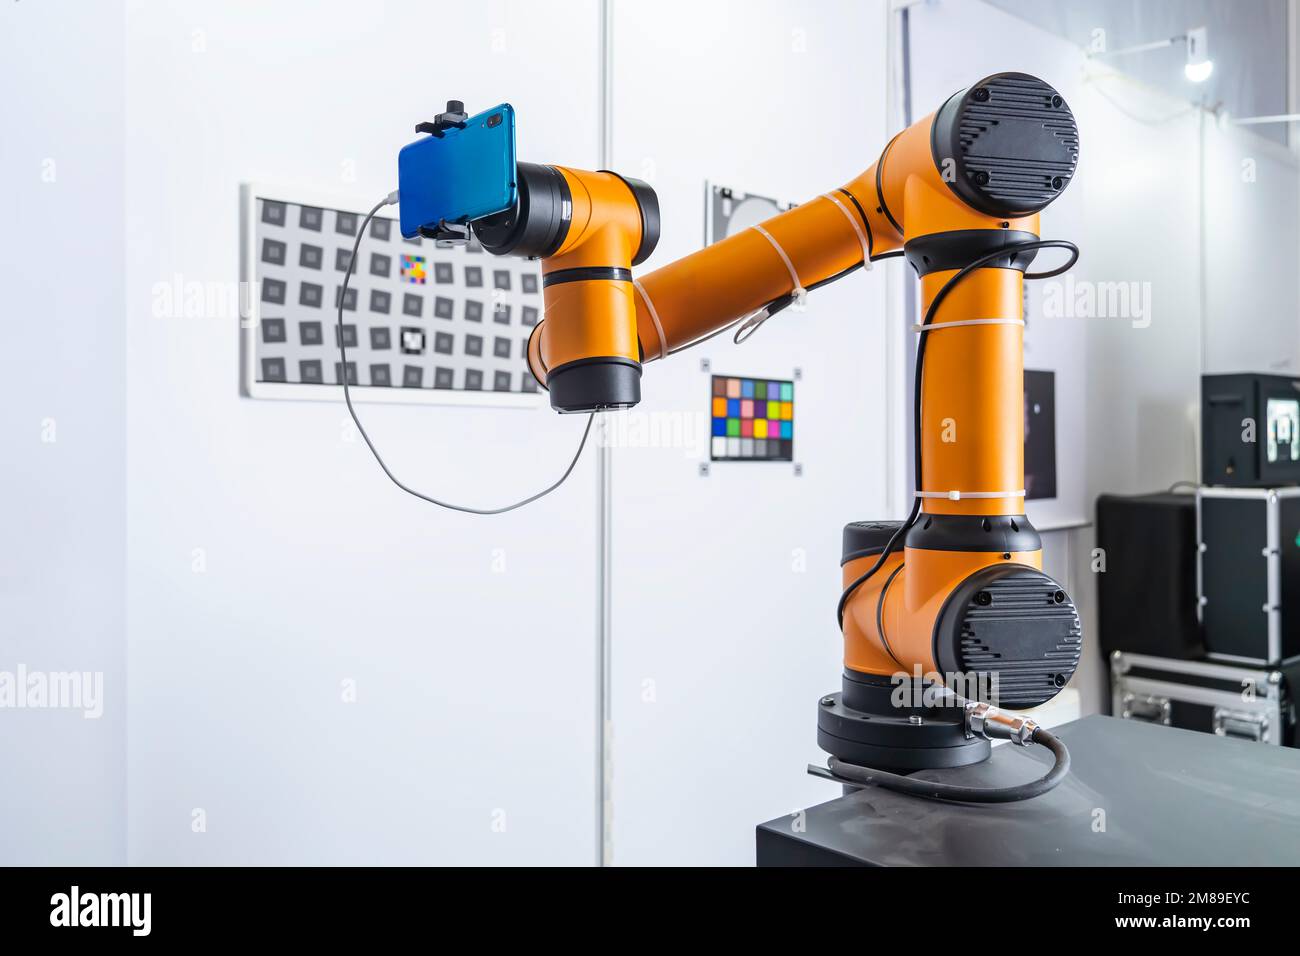 Robotic artificial automated manufacturing smart robot holding mobile phone Stock Photo